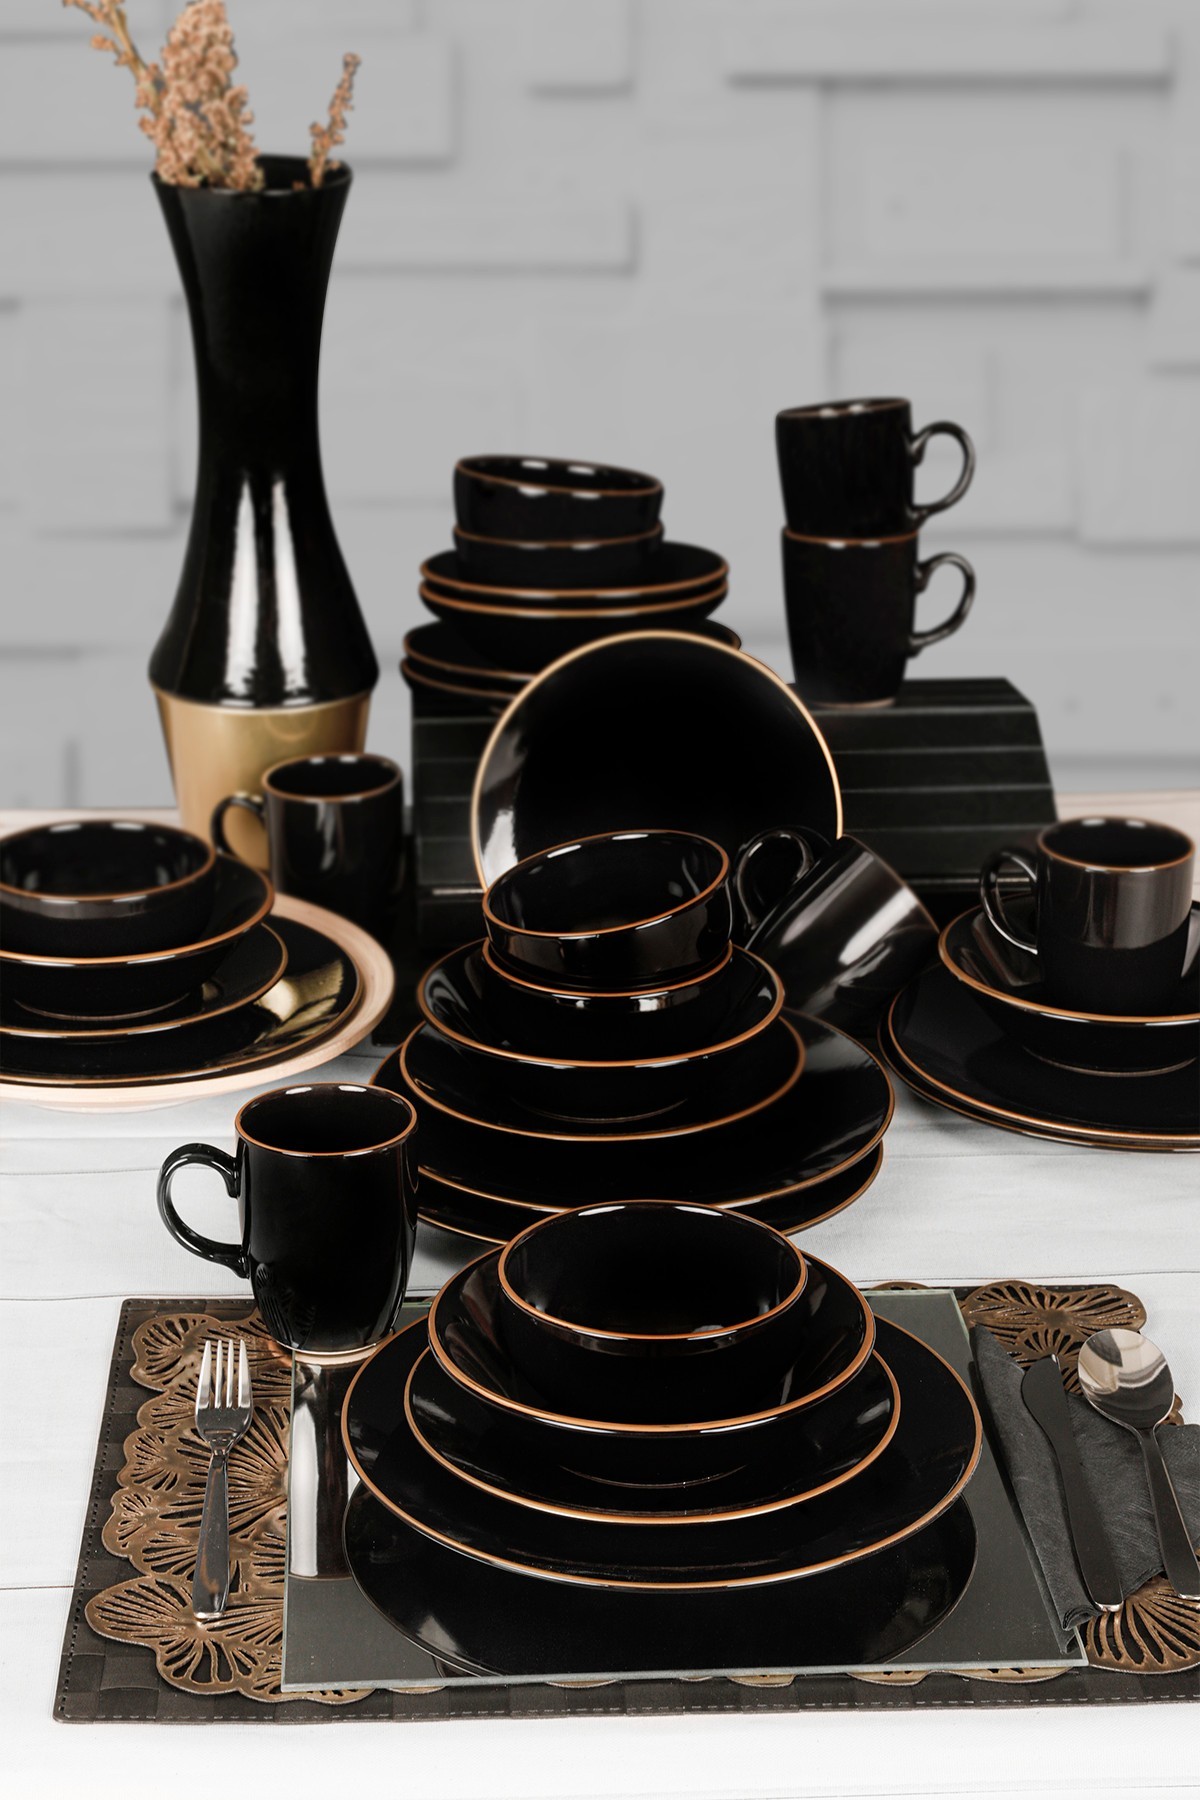 Ceramic Dinner Set (30 Pieces) TY040030F650A841600MAA4Y00